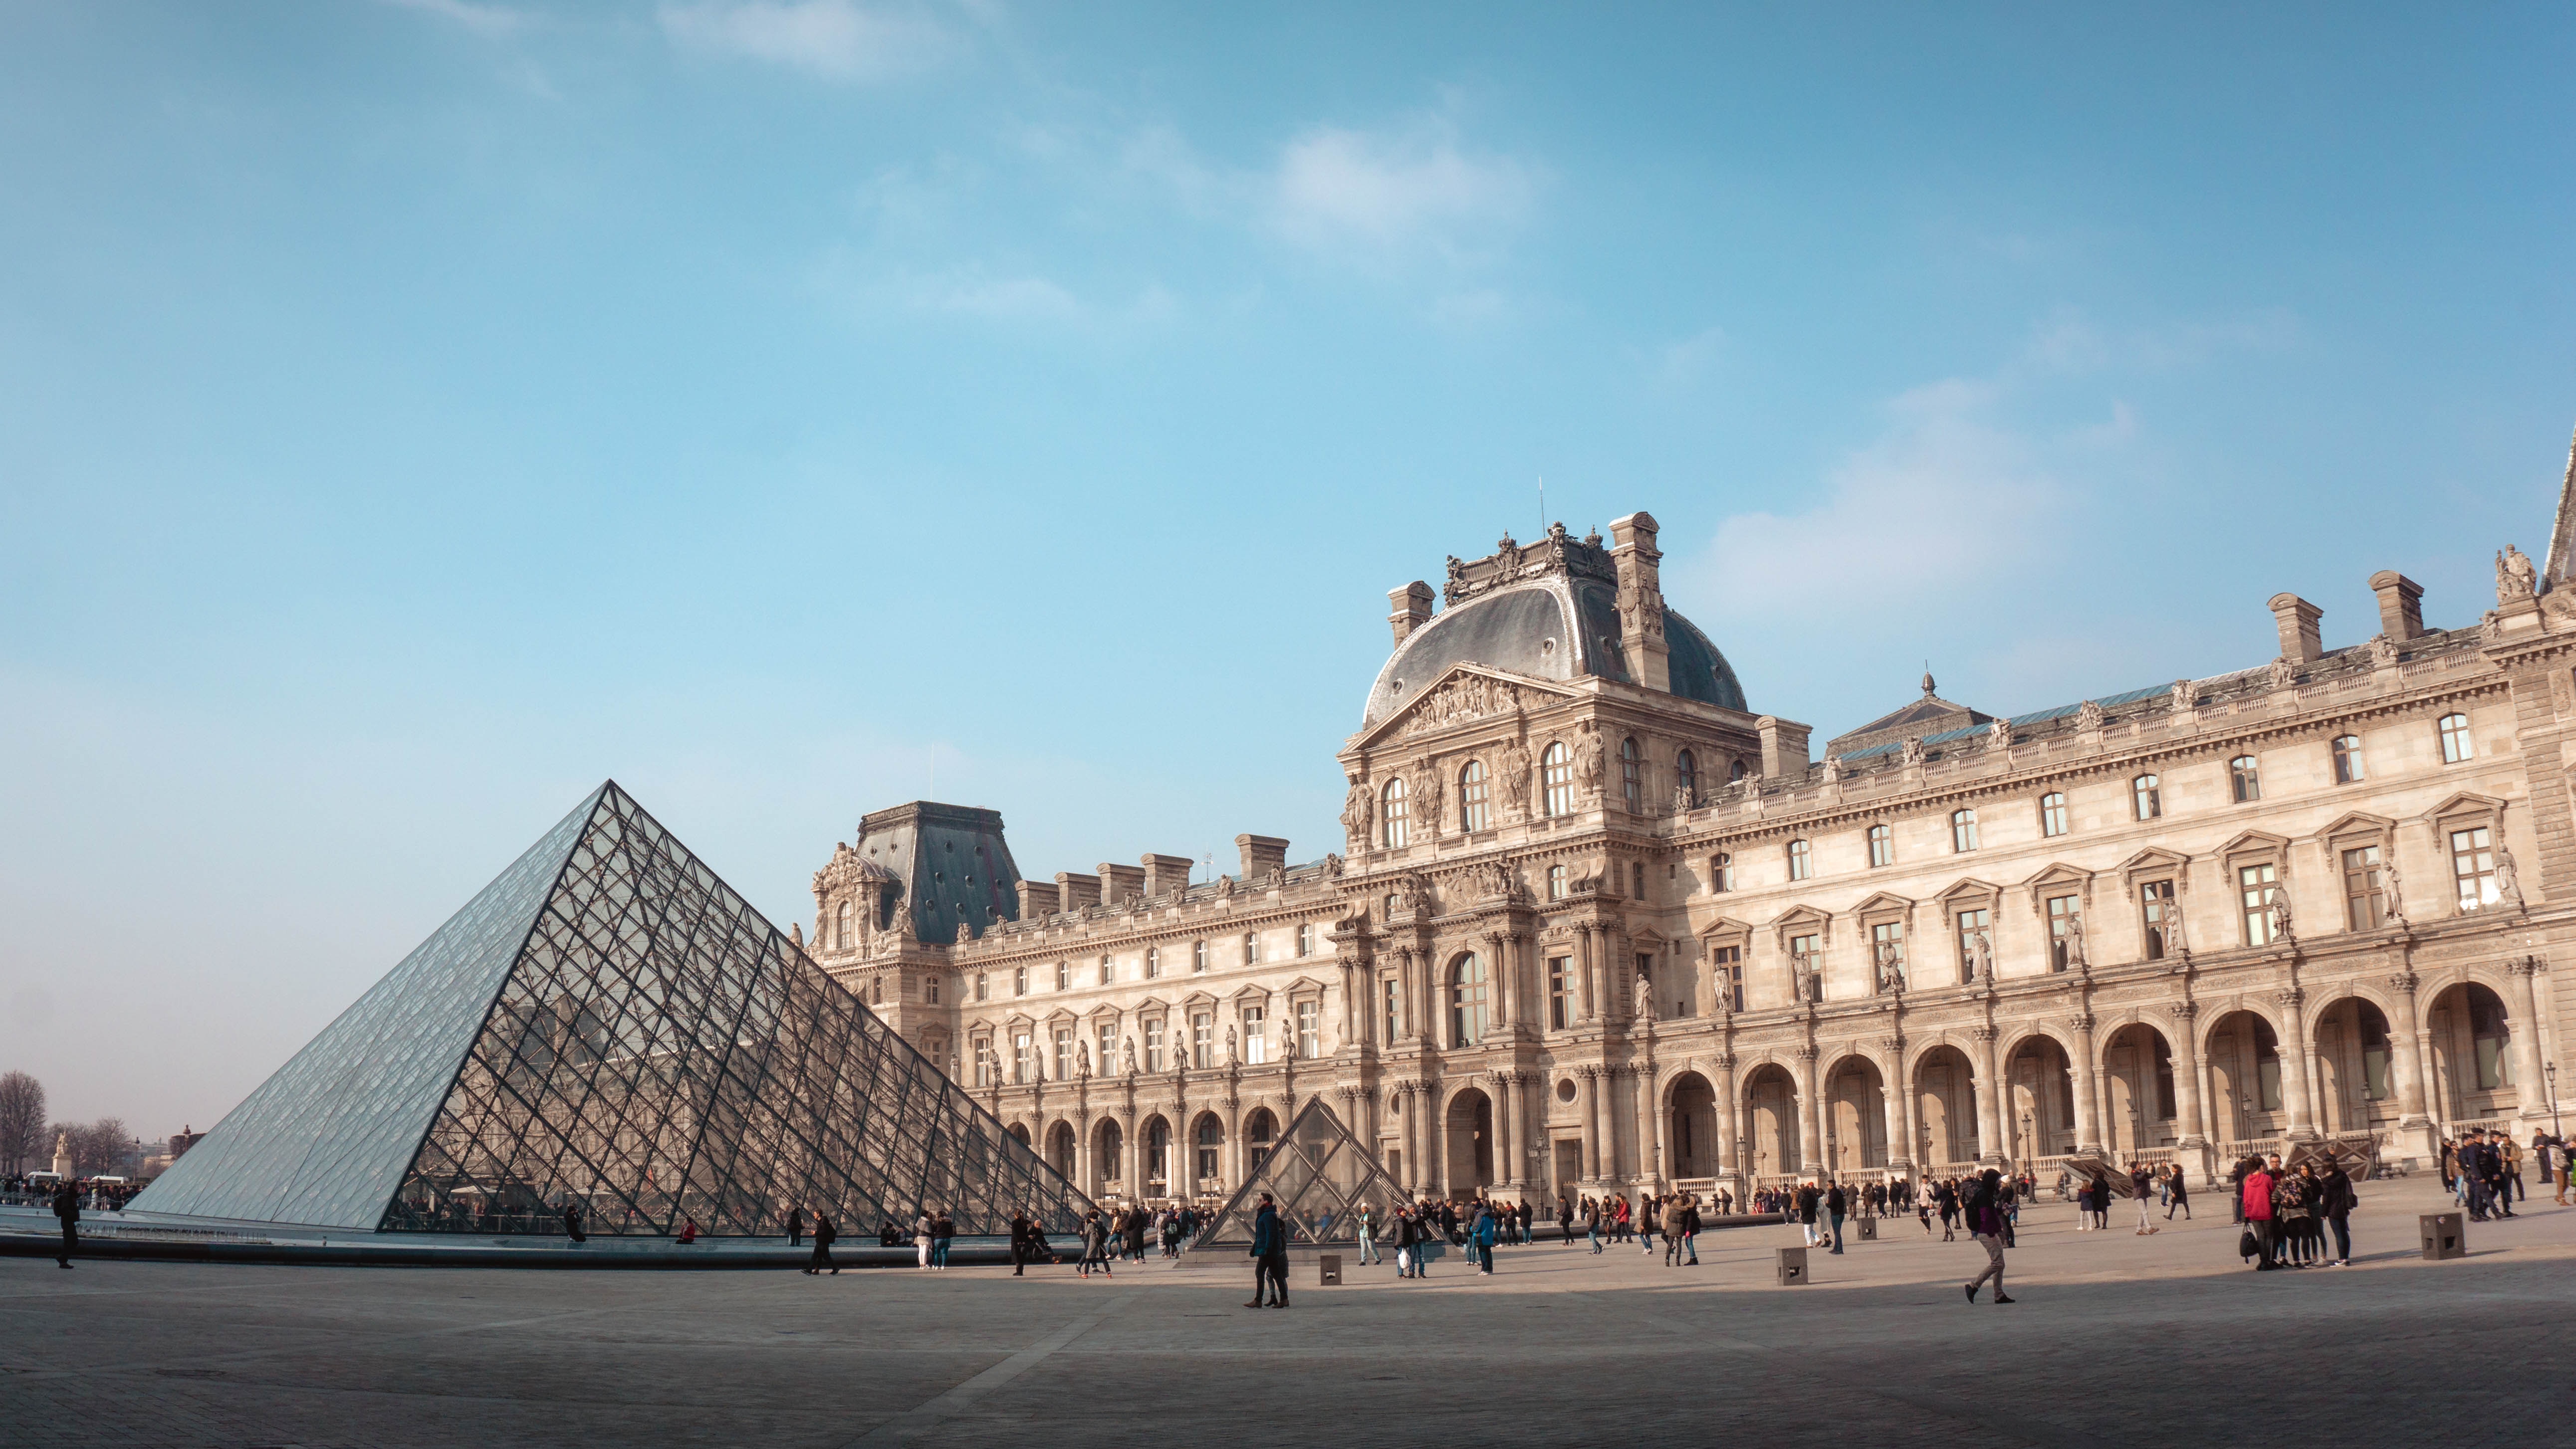 visit the Louvre with Sincura